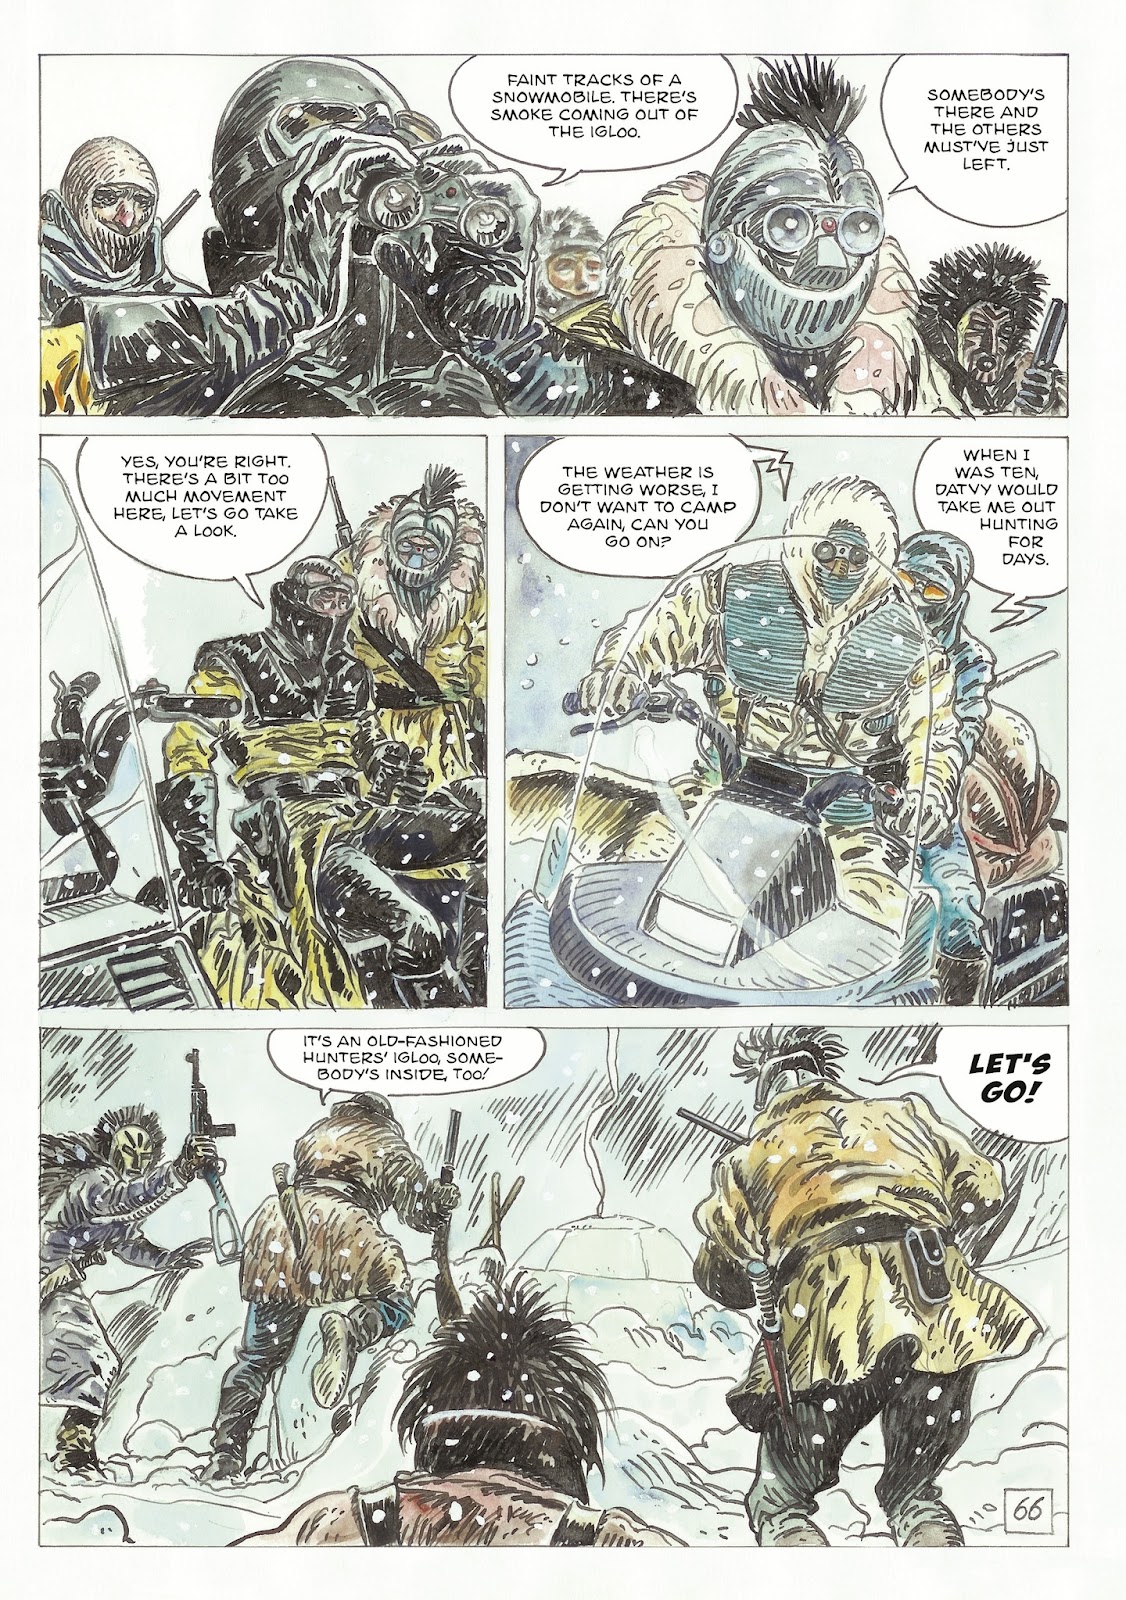 The Man With the Bear issue 2 - Page 12